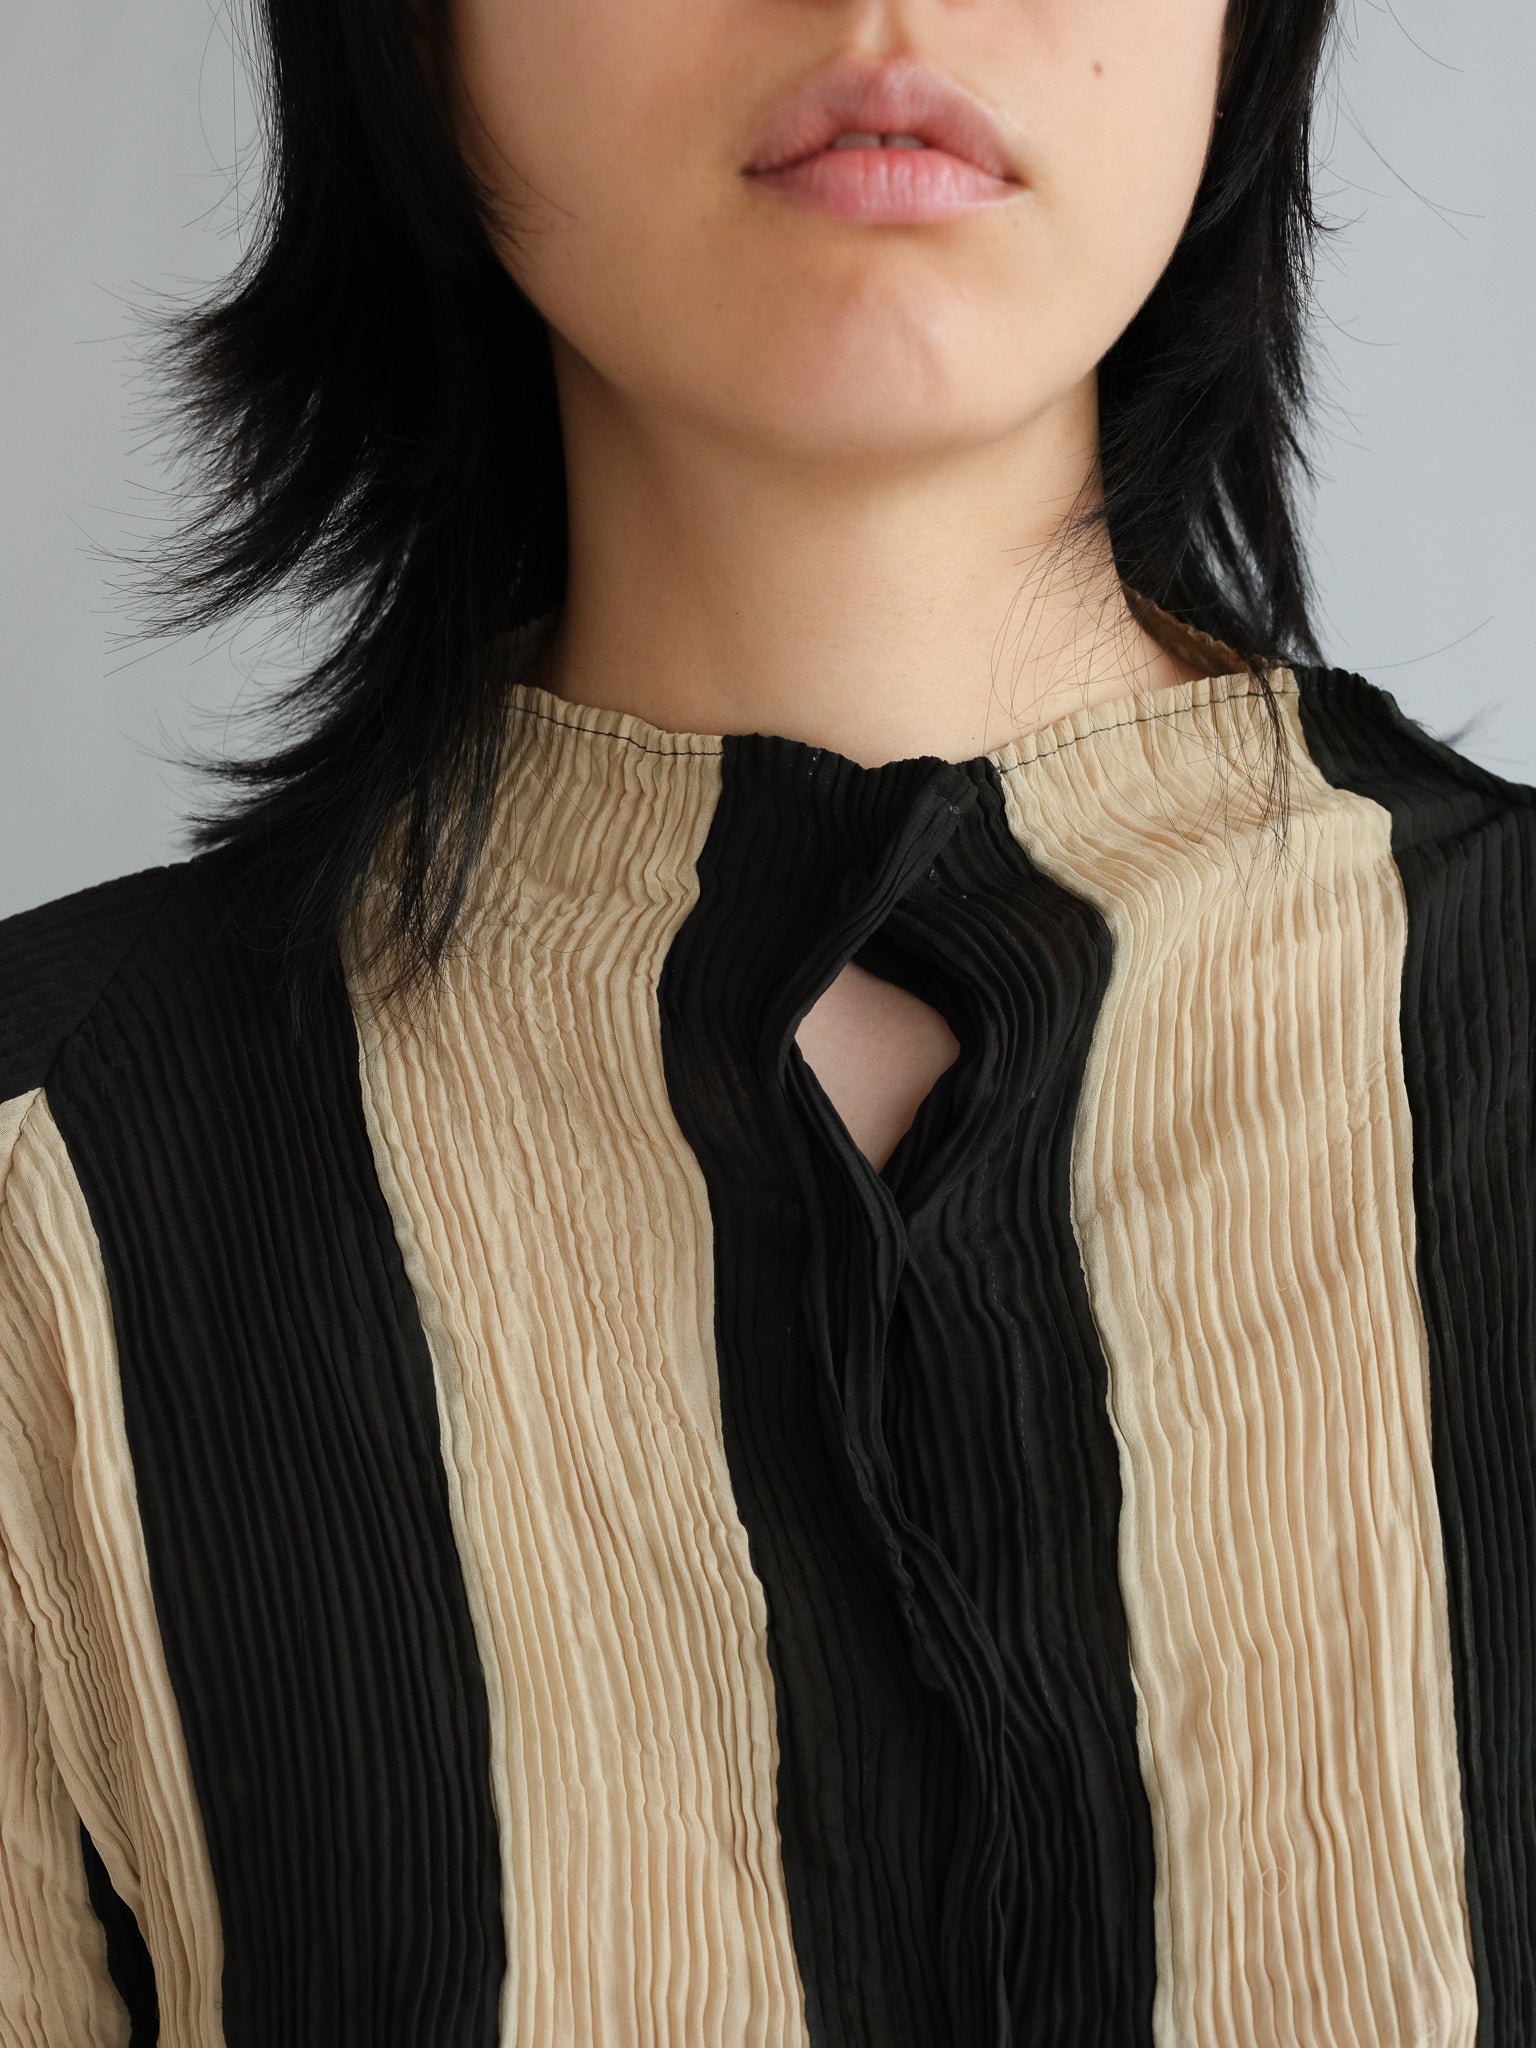 Issey Miyake white label pleated top